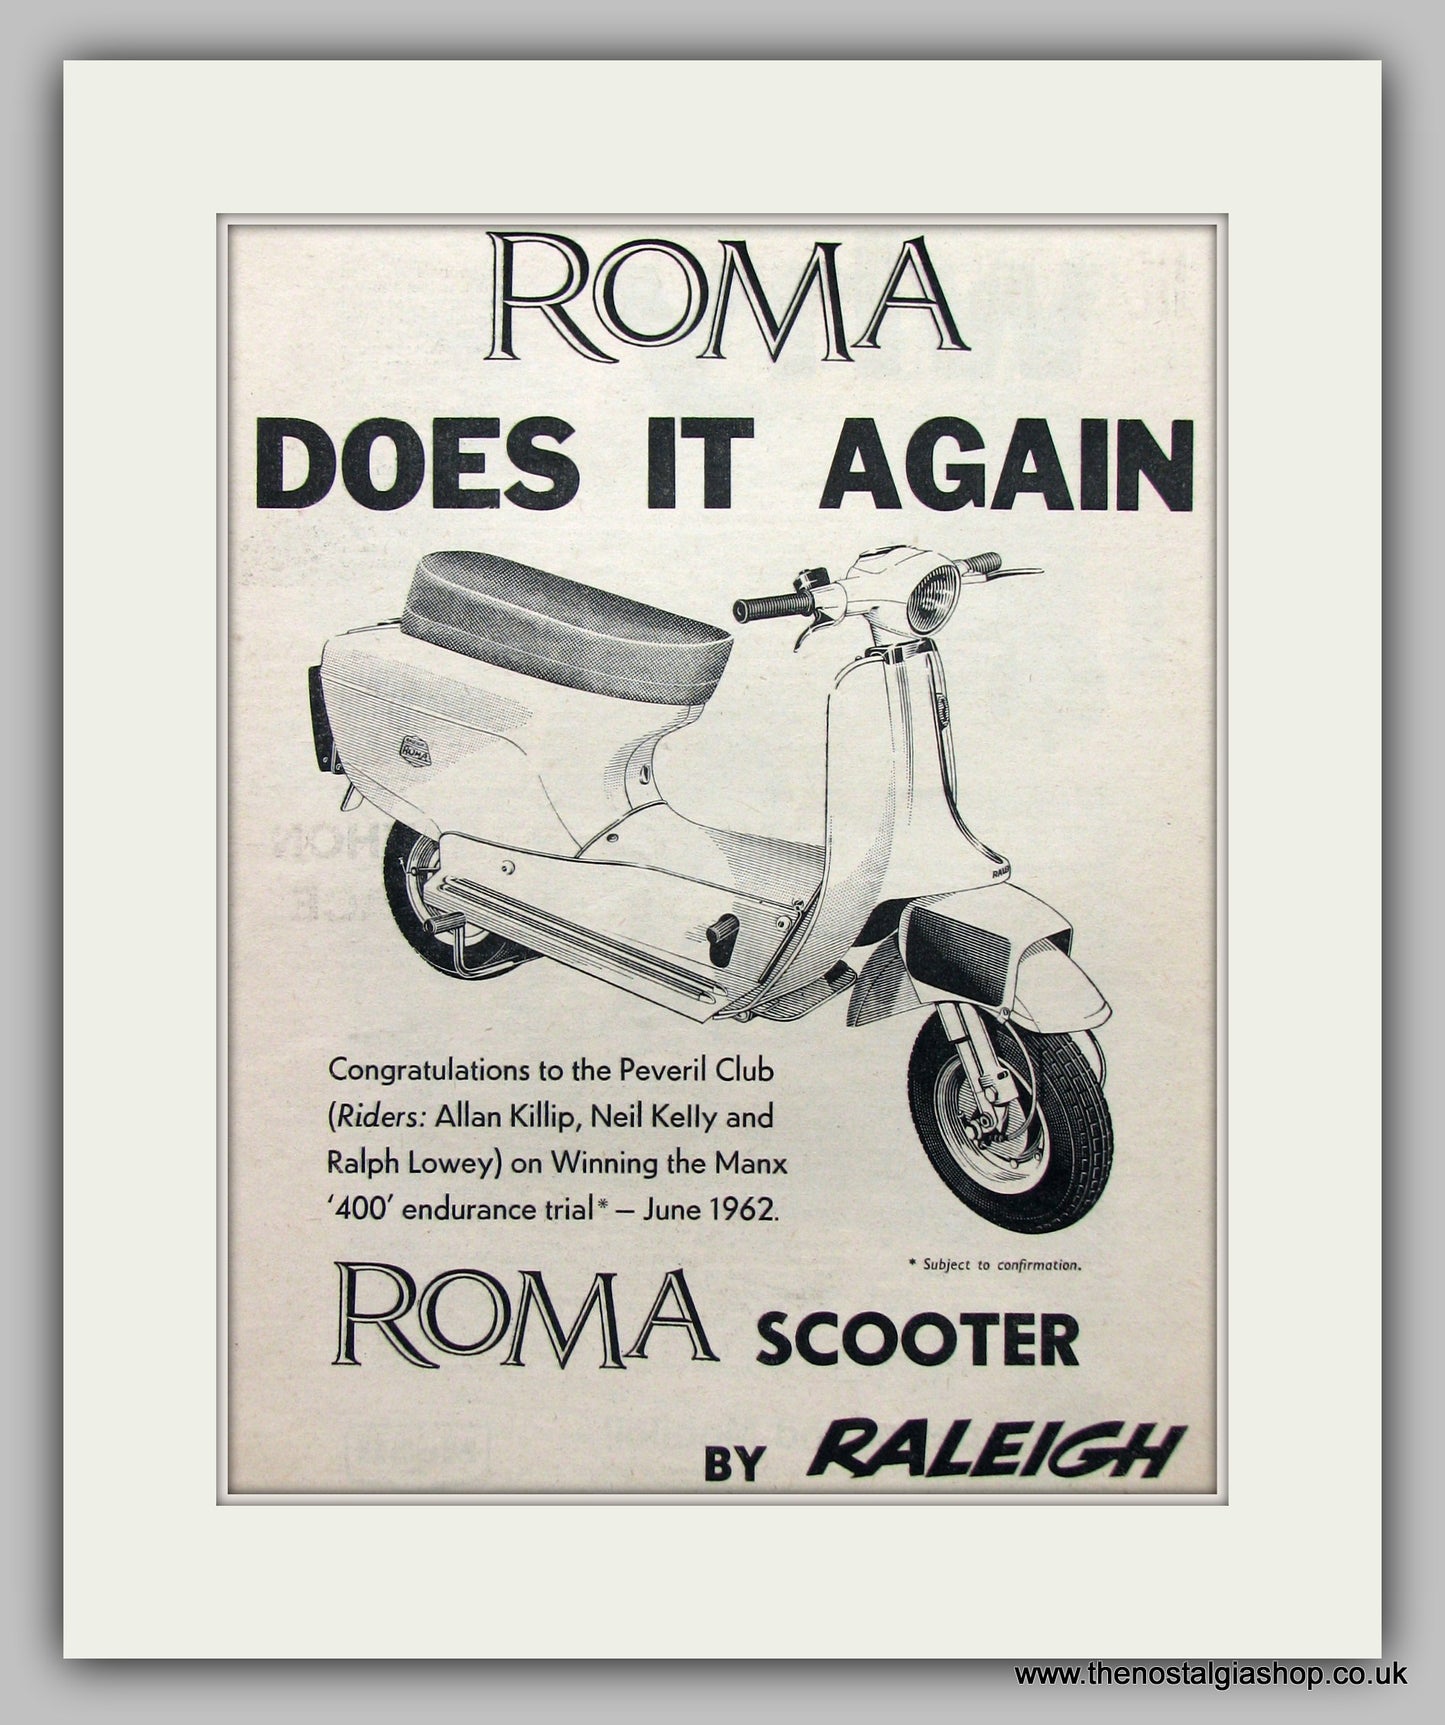 Roma Scooter by Raleigh 1962 Original Advert (ref AD6825)